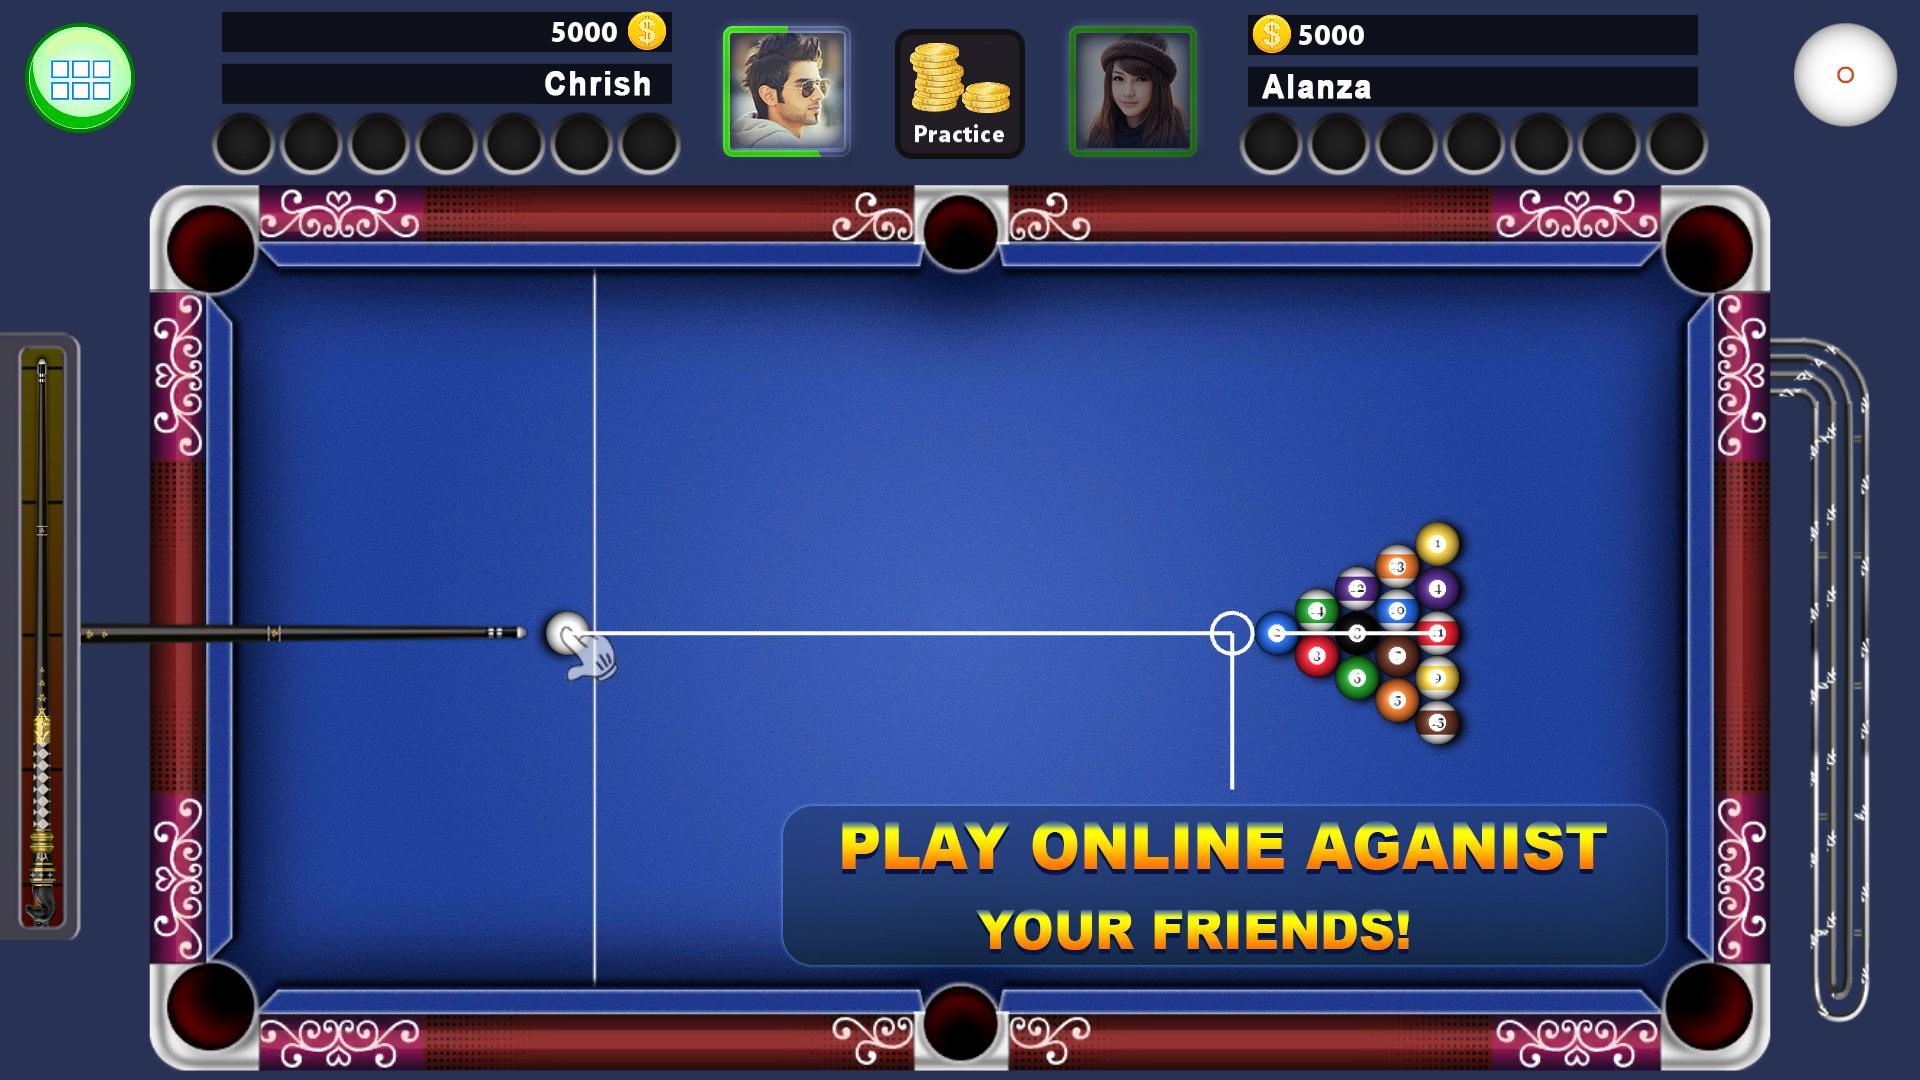 8 Ball Pool - Multiplayer for Android - APK Download